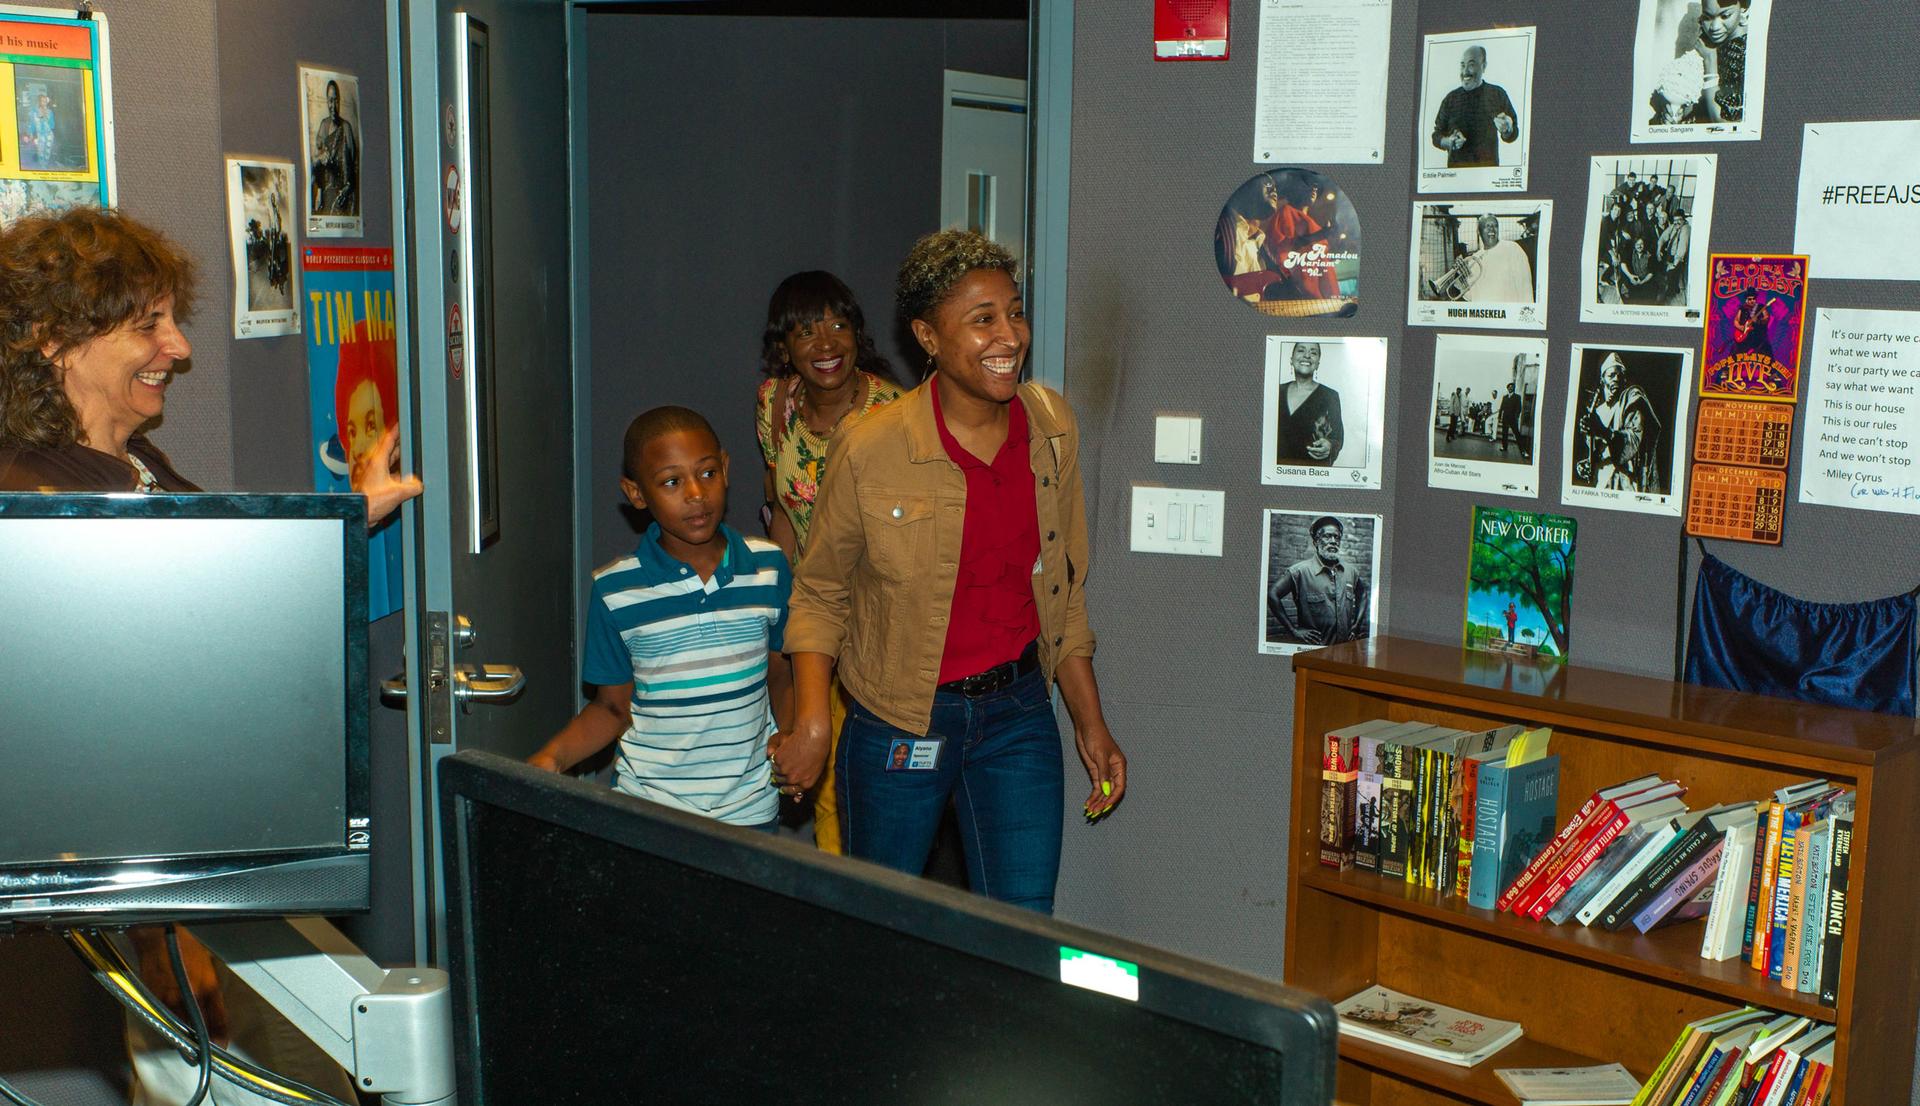 A woman smiles as she walks through a door, with other family members behind her